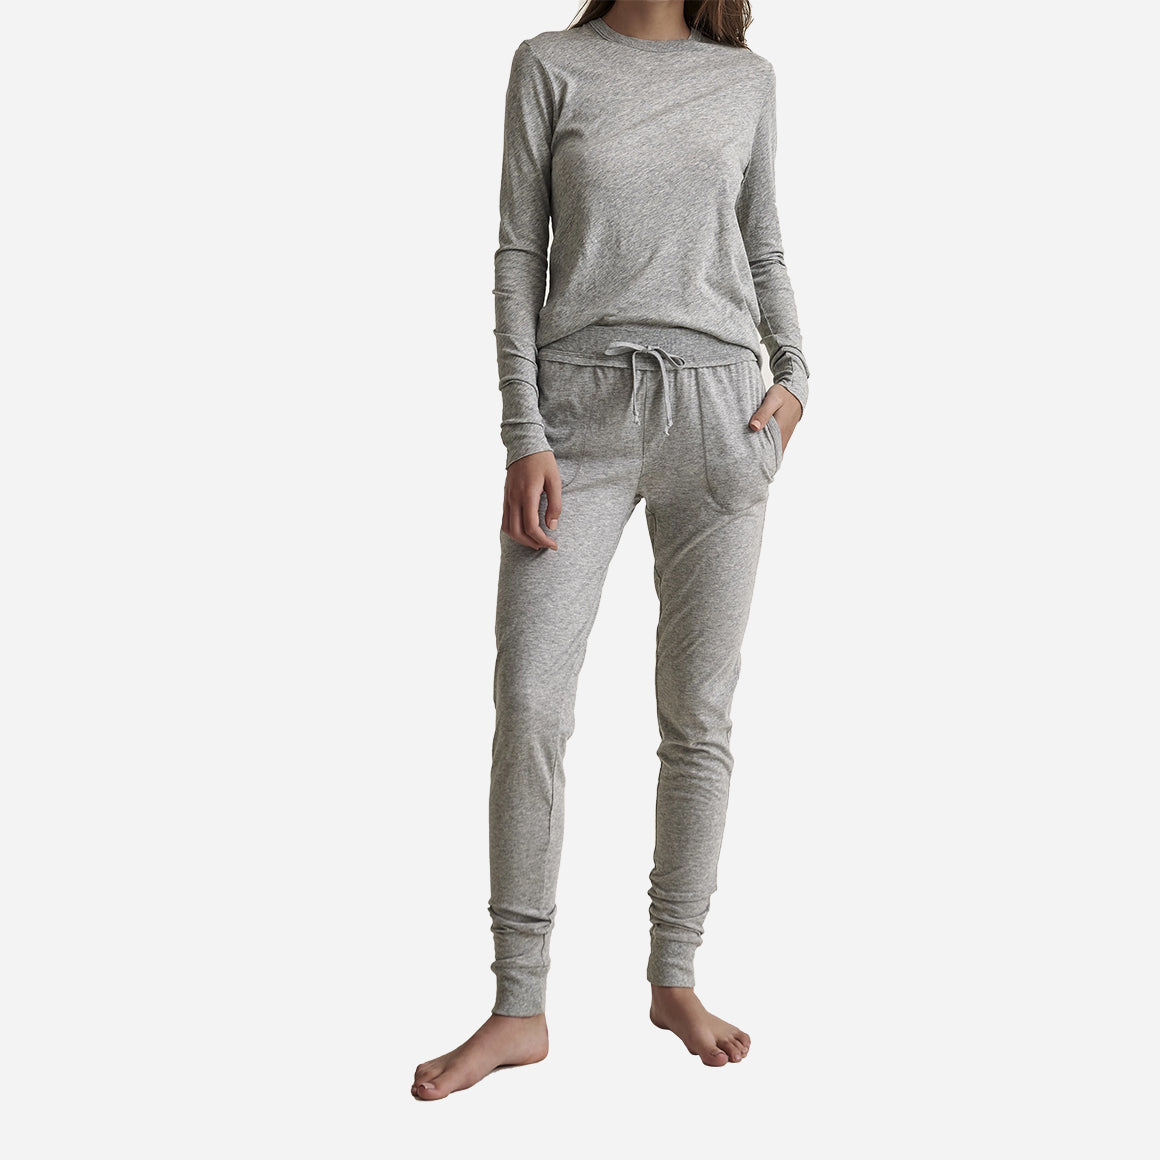 The Skinny Pant features a sleek and form-fitting design that effortlessly flatters your silhouette. Detailed with two convenient hip pockets and an elastic waistband that provides a comfortable and flexible fit. Whether you're lounging at home or running errands, these pants offer both style and comfort.